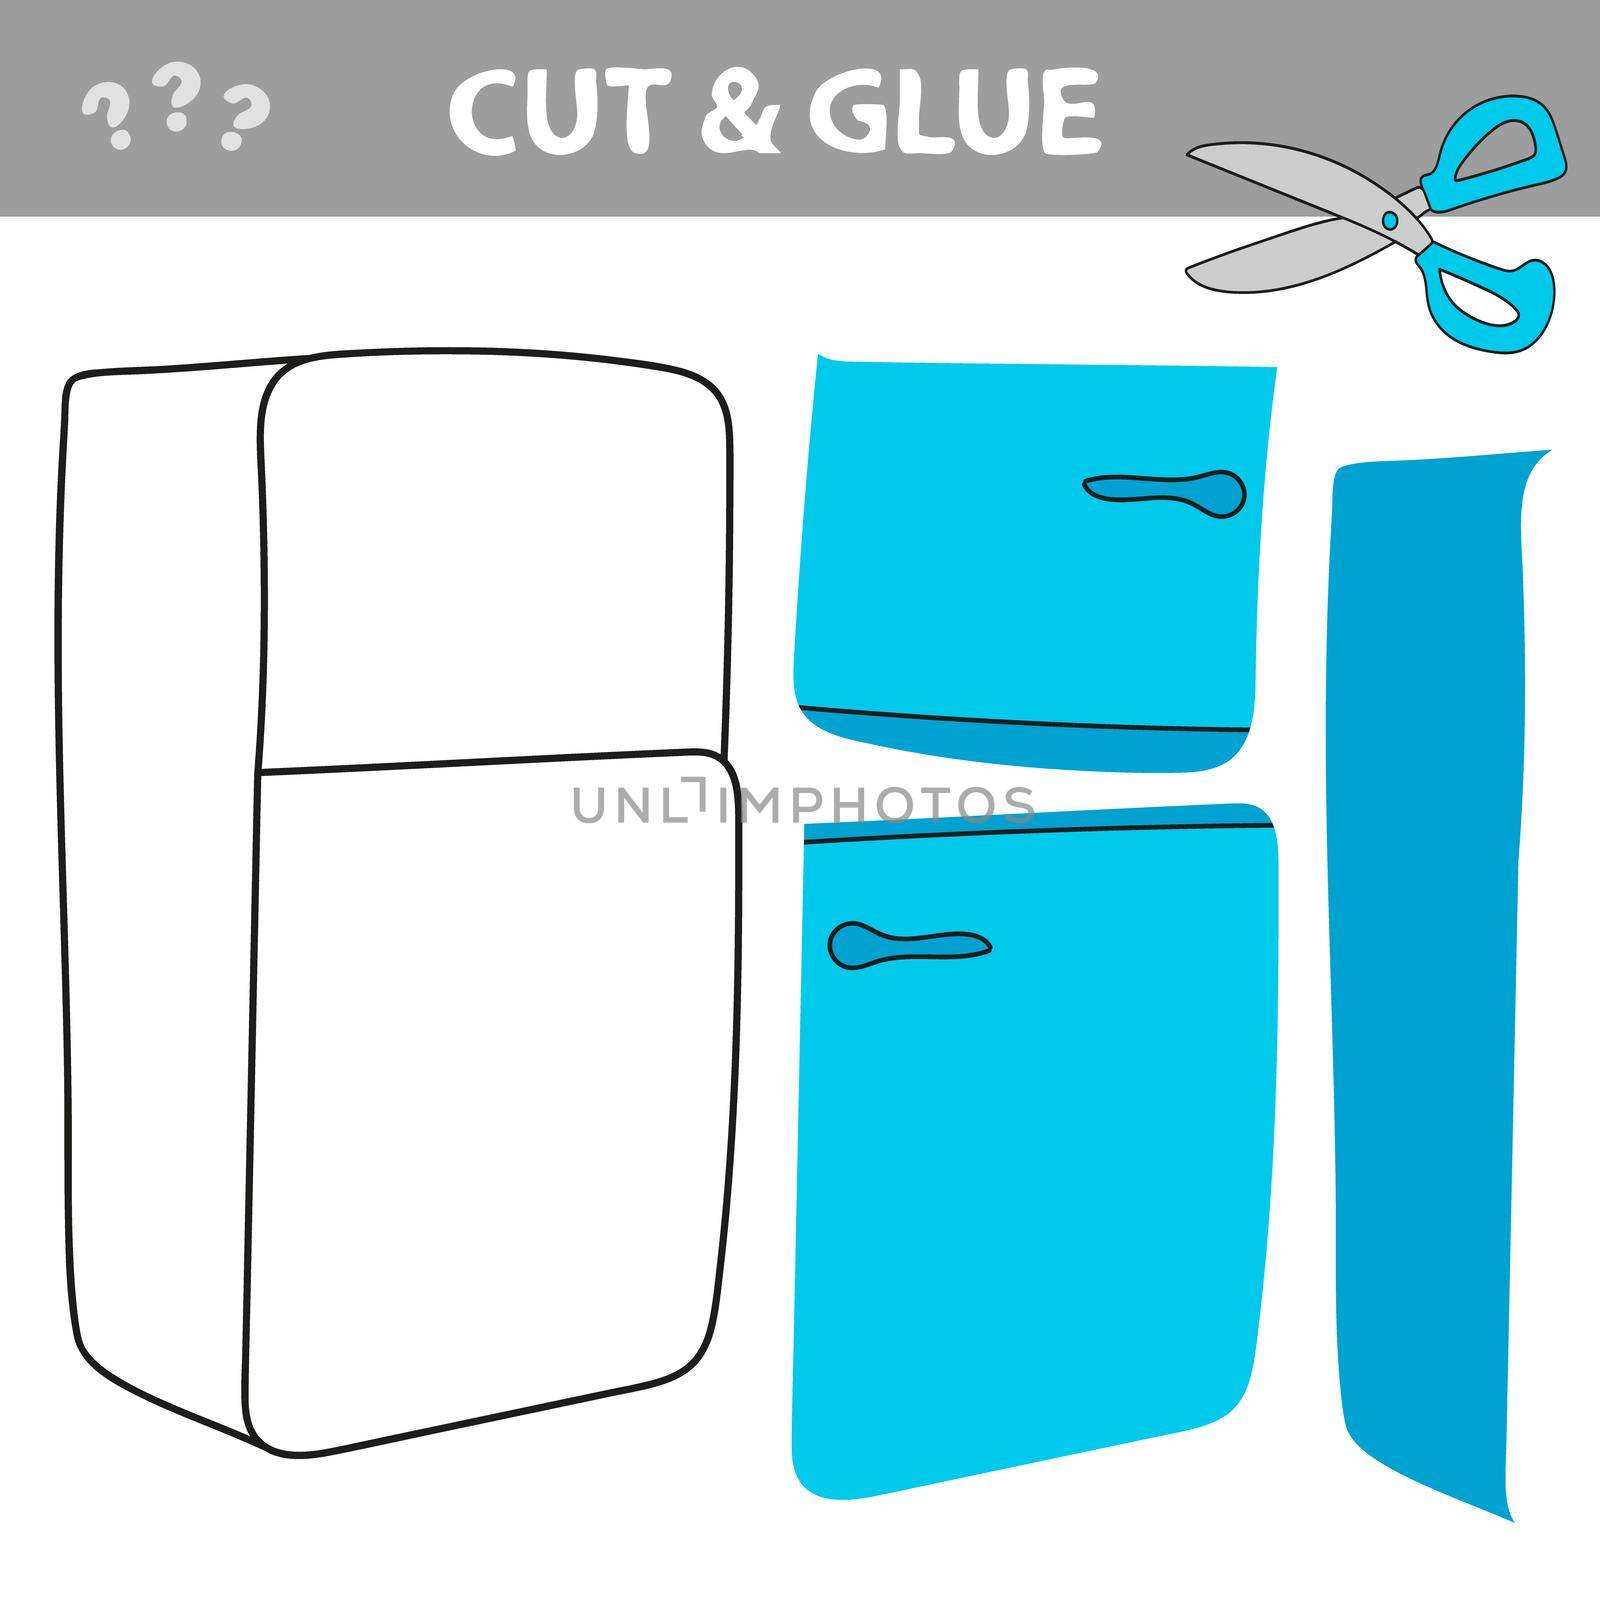 Cut and glue - Simple game for kids. Refrigerator paper game for kids. Cartoon education developing worksheet.